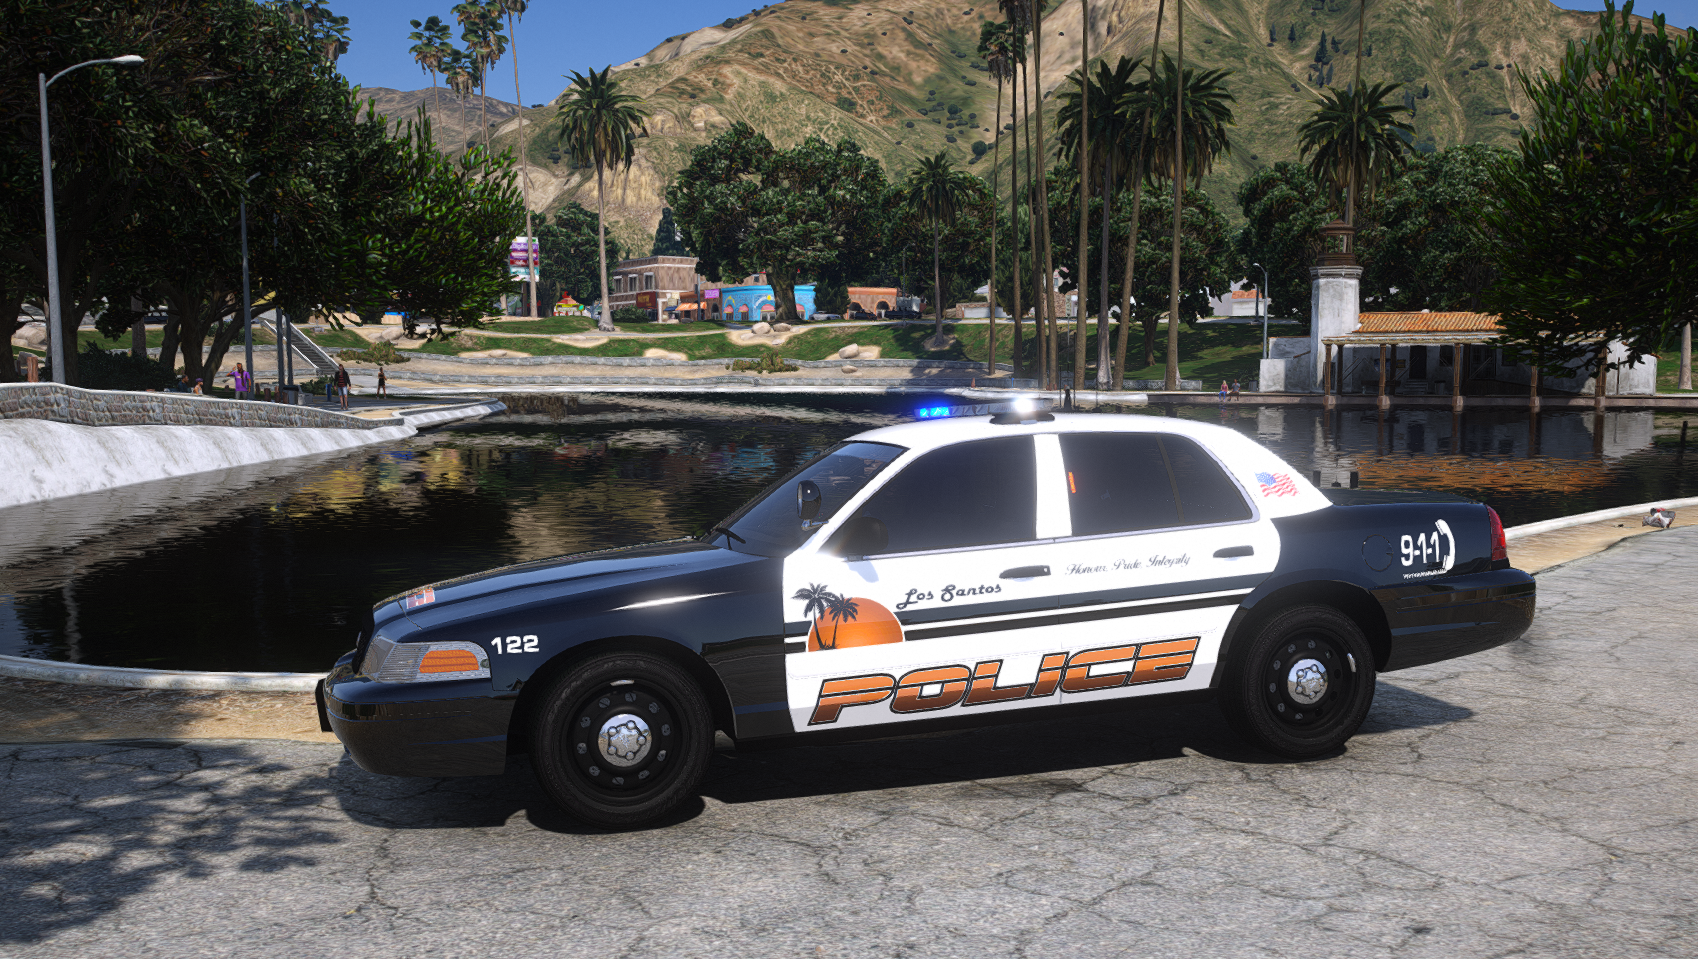 More information about "LSPD PACK INFIDEL"